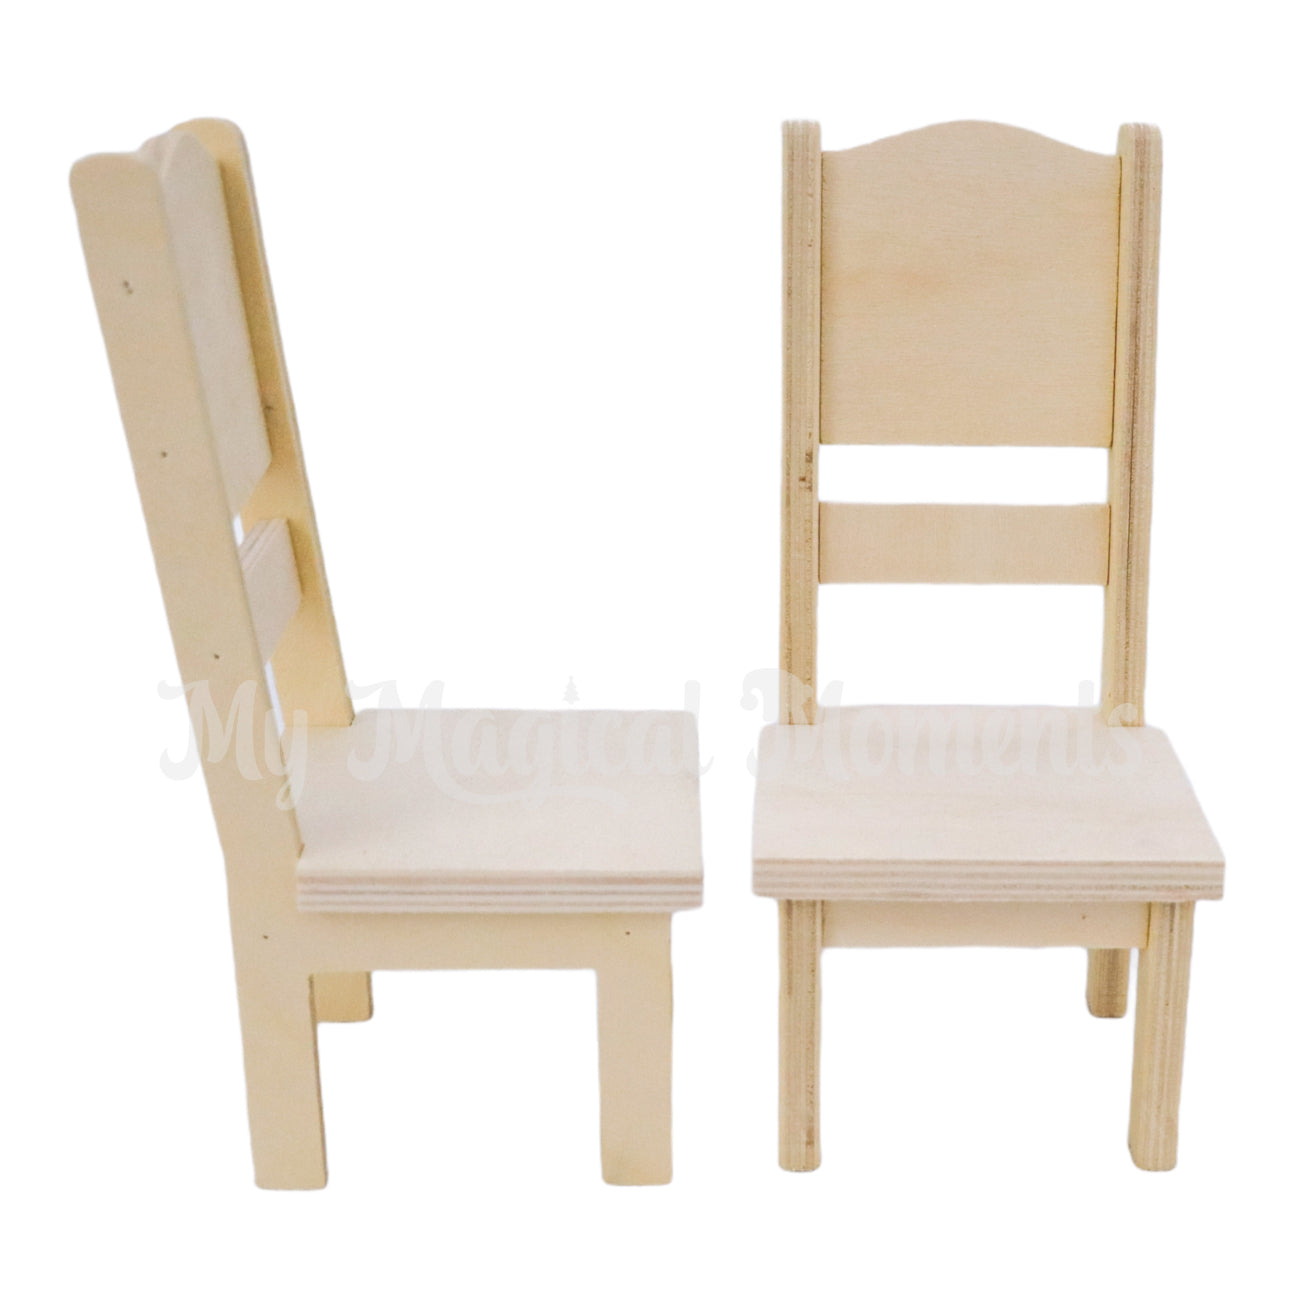 Wooden elf sized chairs